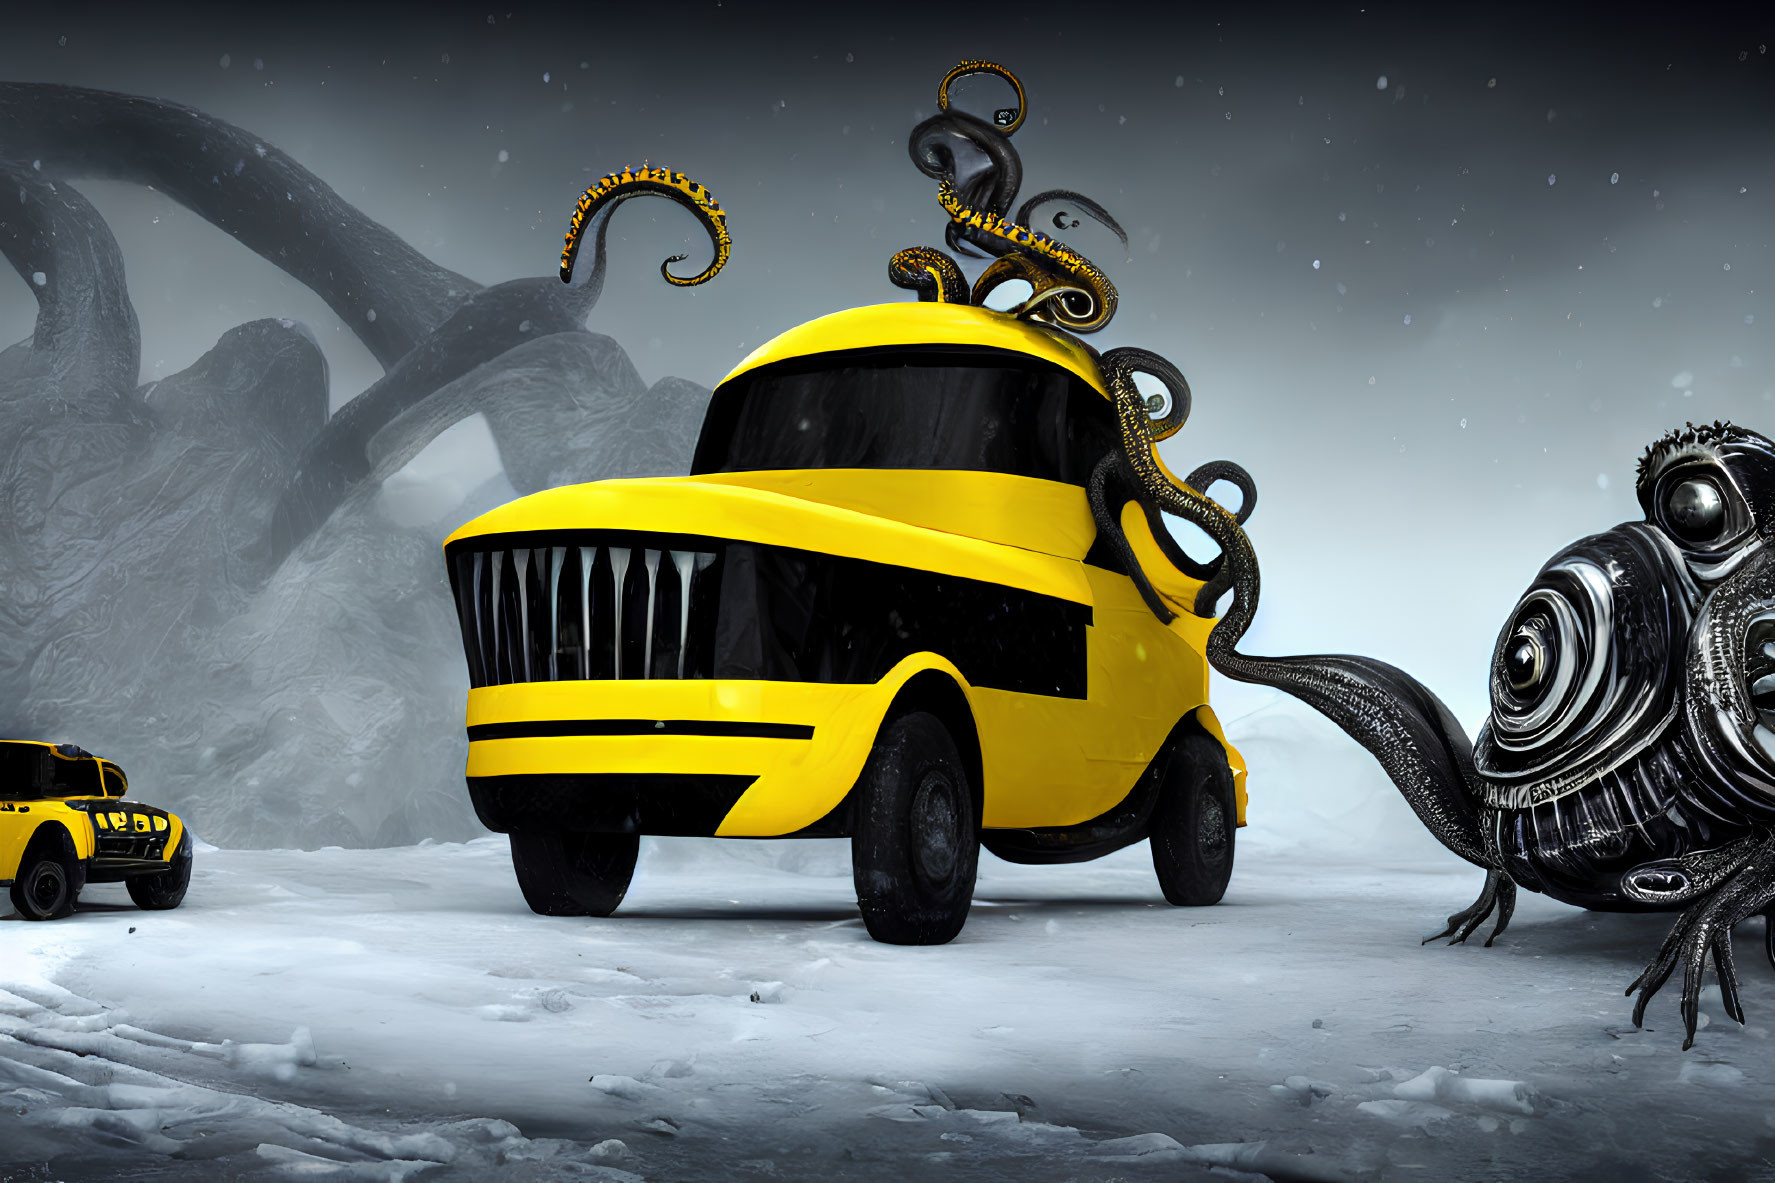 Yellow-and-black tentacled vehicle in surreal snowy landscape.